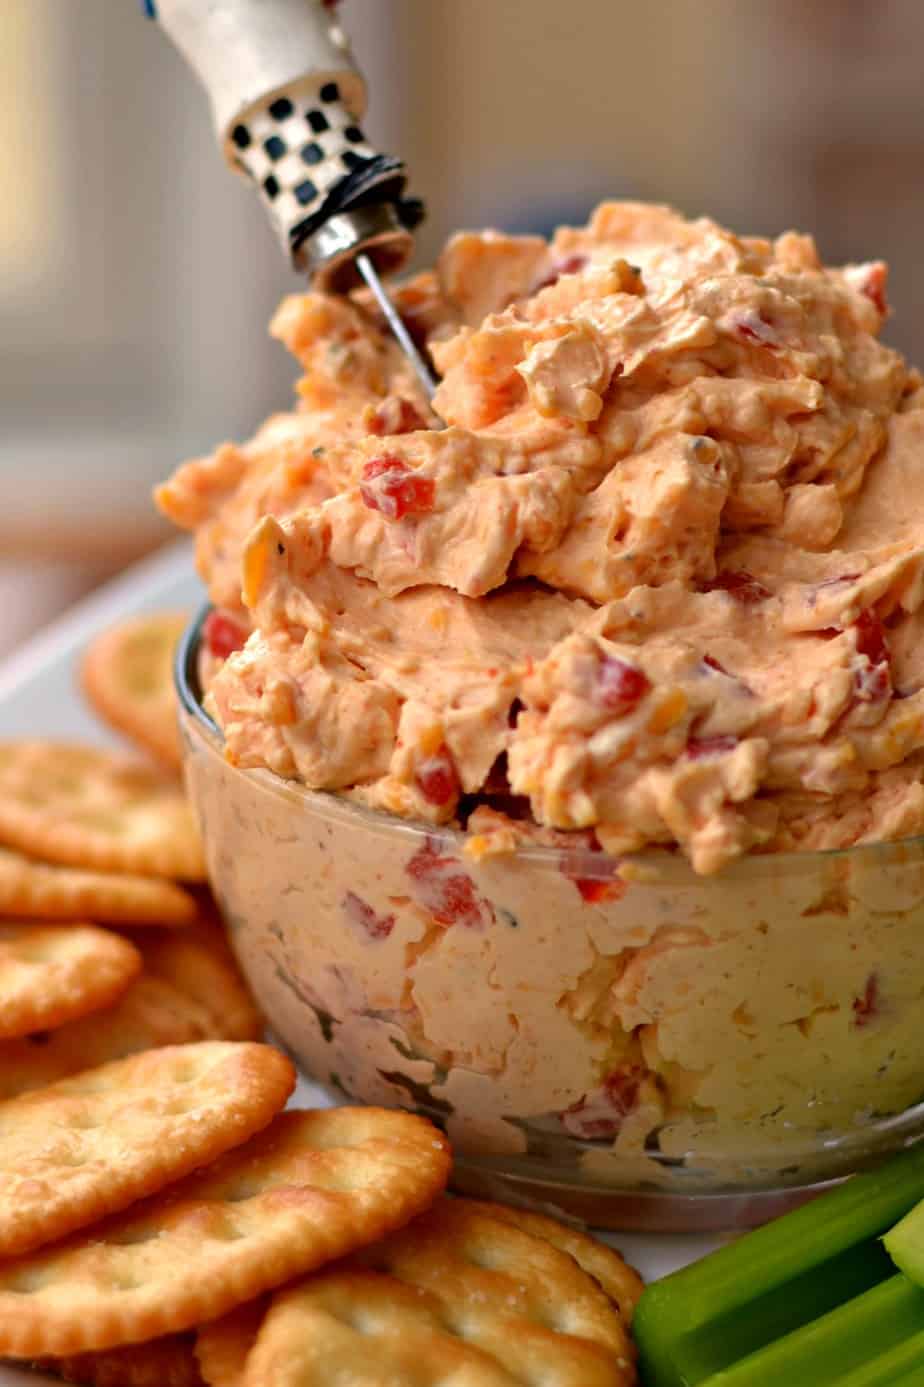 This quick and easy to make flavor packed Southern Pimento Cheese is sure to be the hit of your next party.